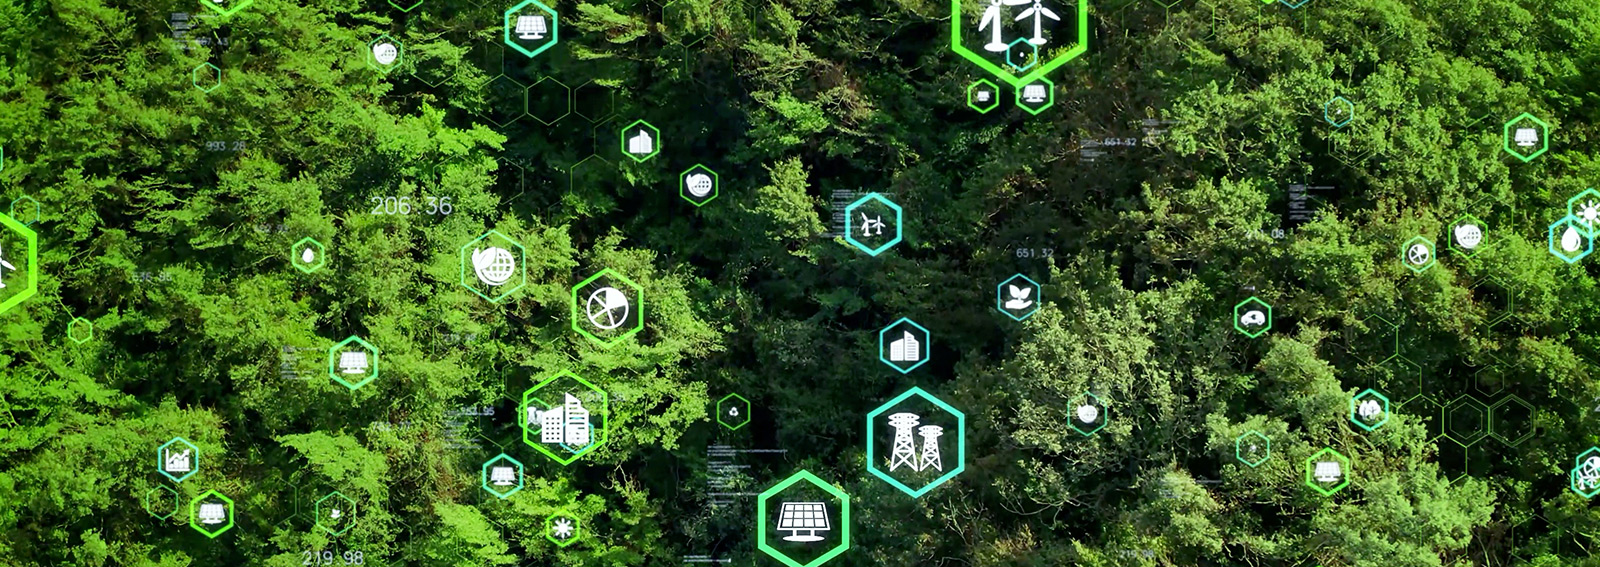 Green forest with contextual icons